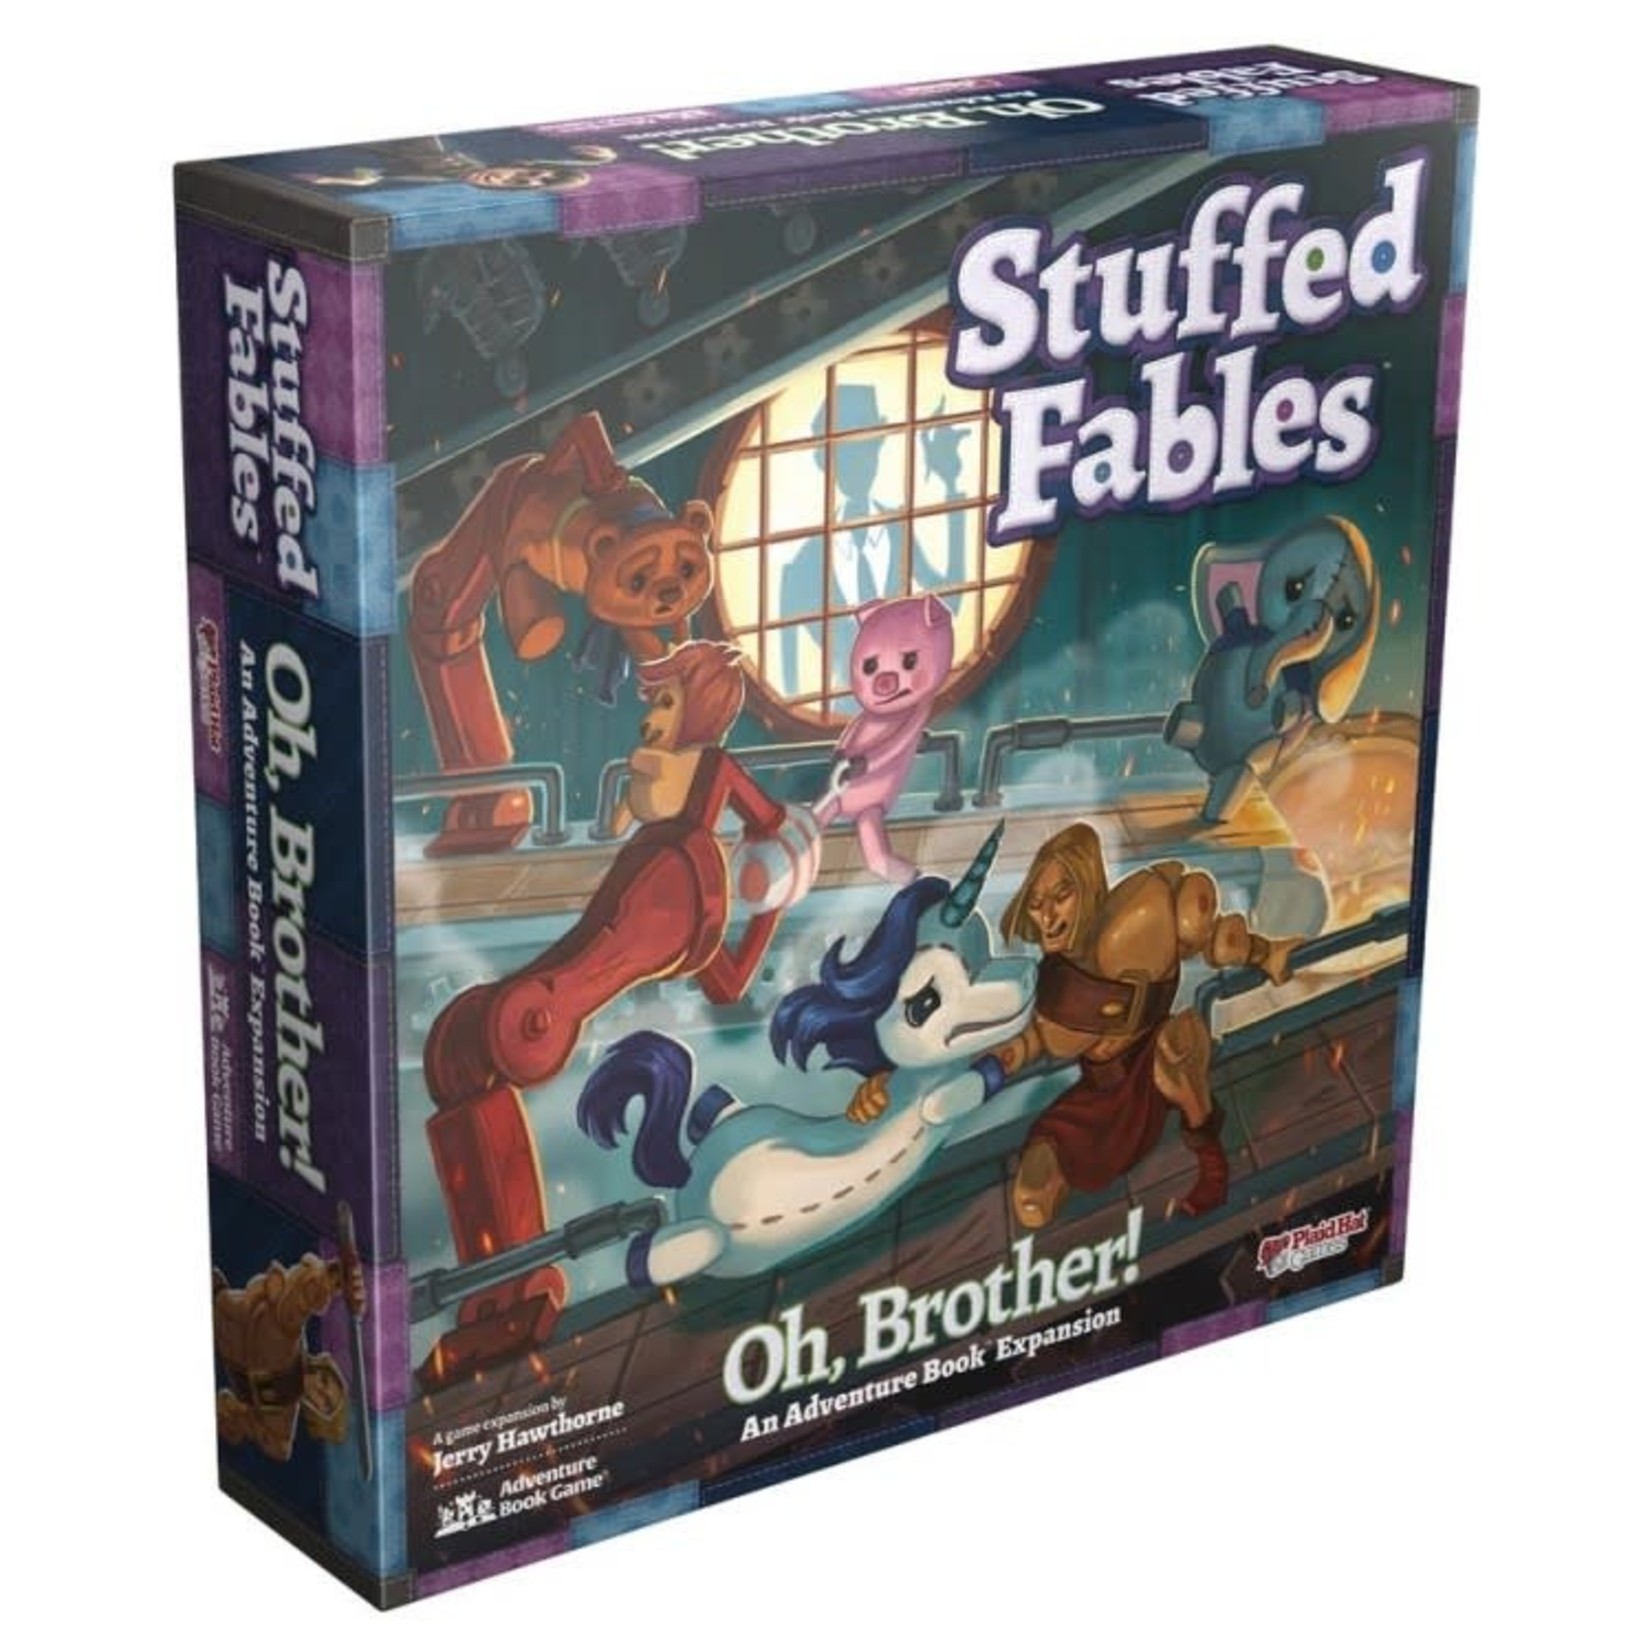 Stuffed Fables Oh, Brother!